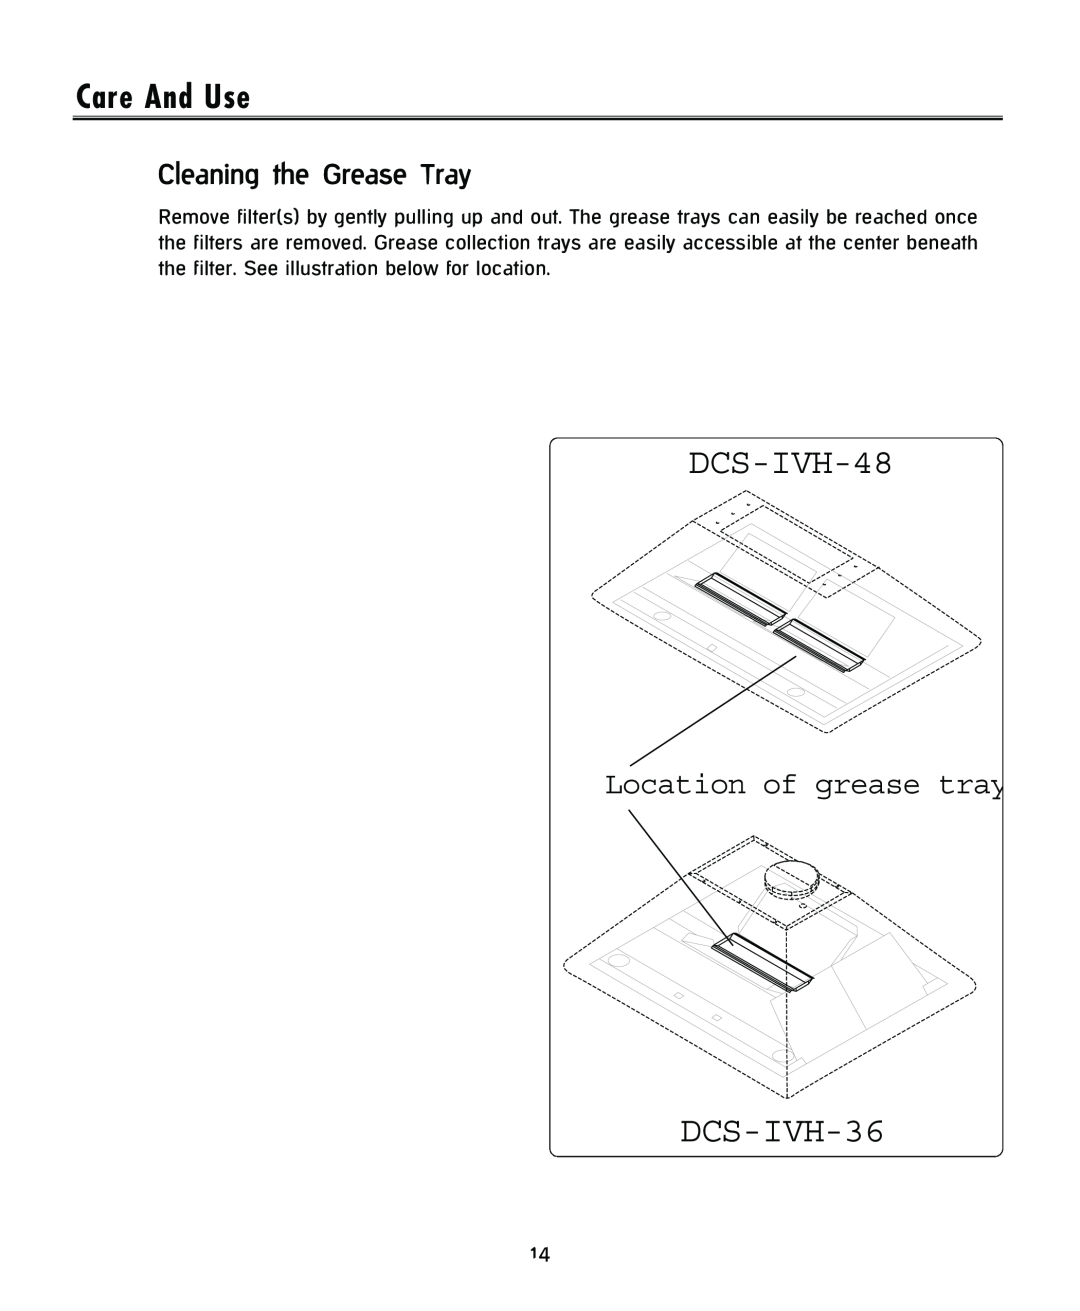 DCS installation instructions DCS-IVH-48, DCS-IVH-36, Care And Use, Location of grease tray, Cleaning the Grease Tray 